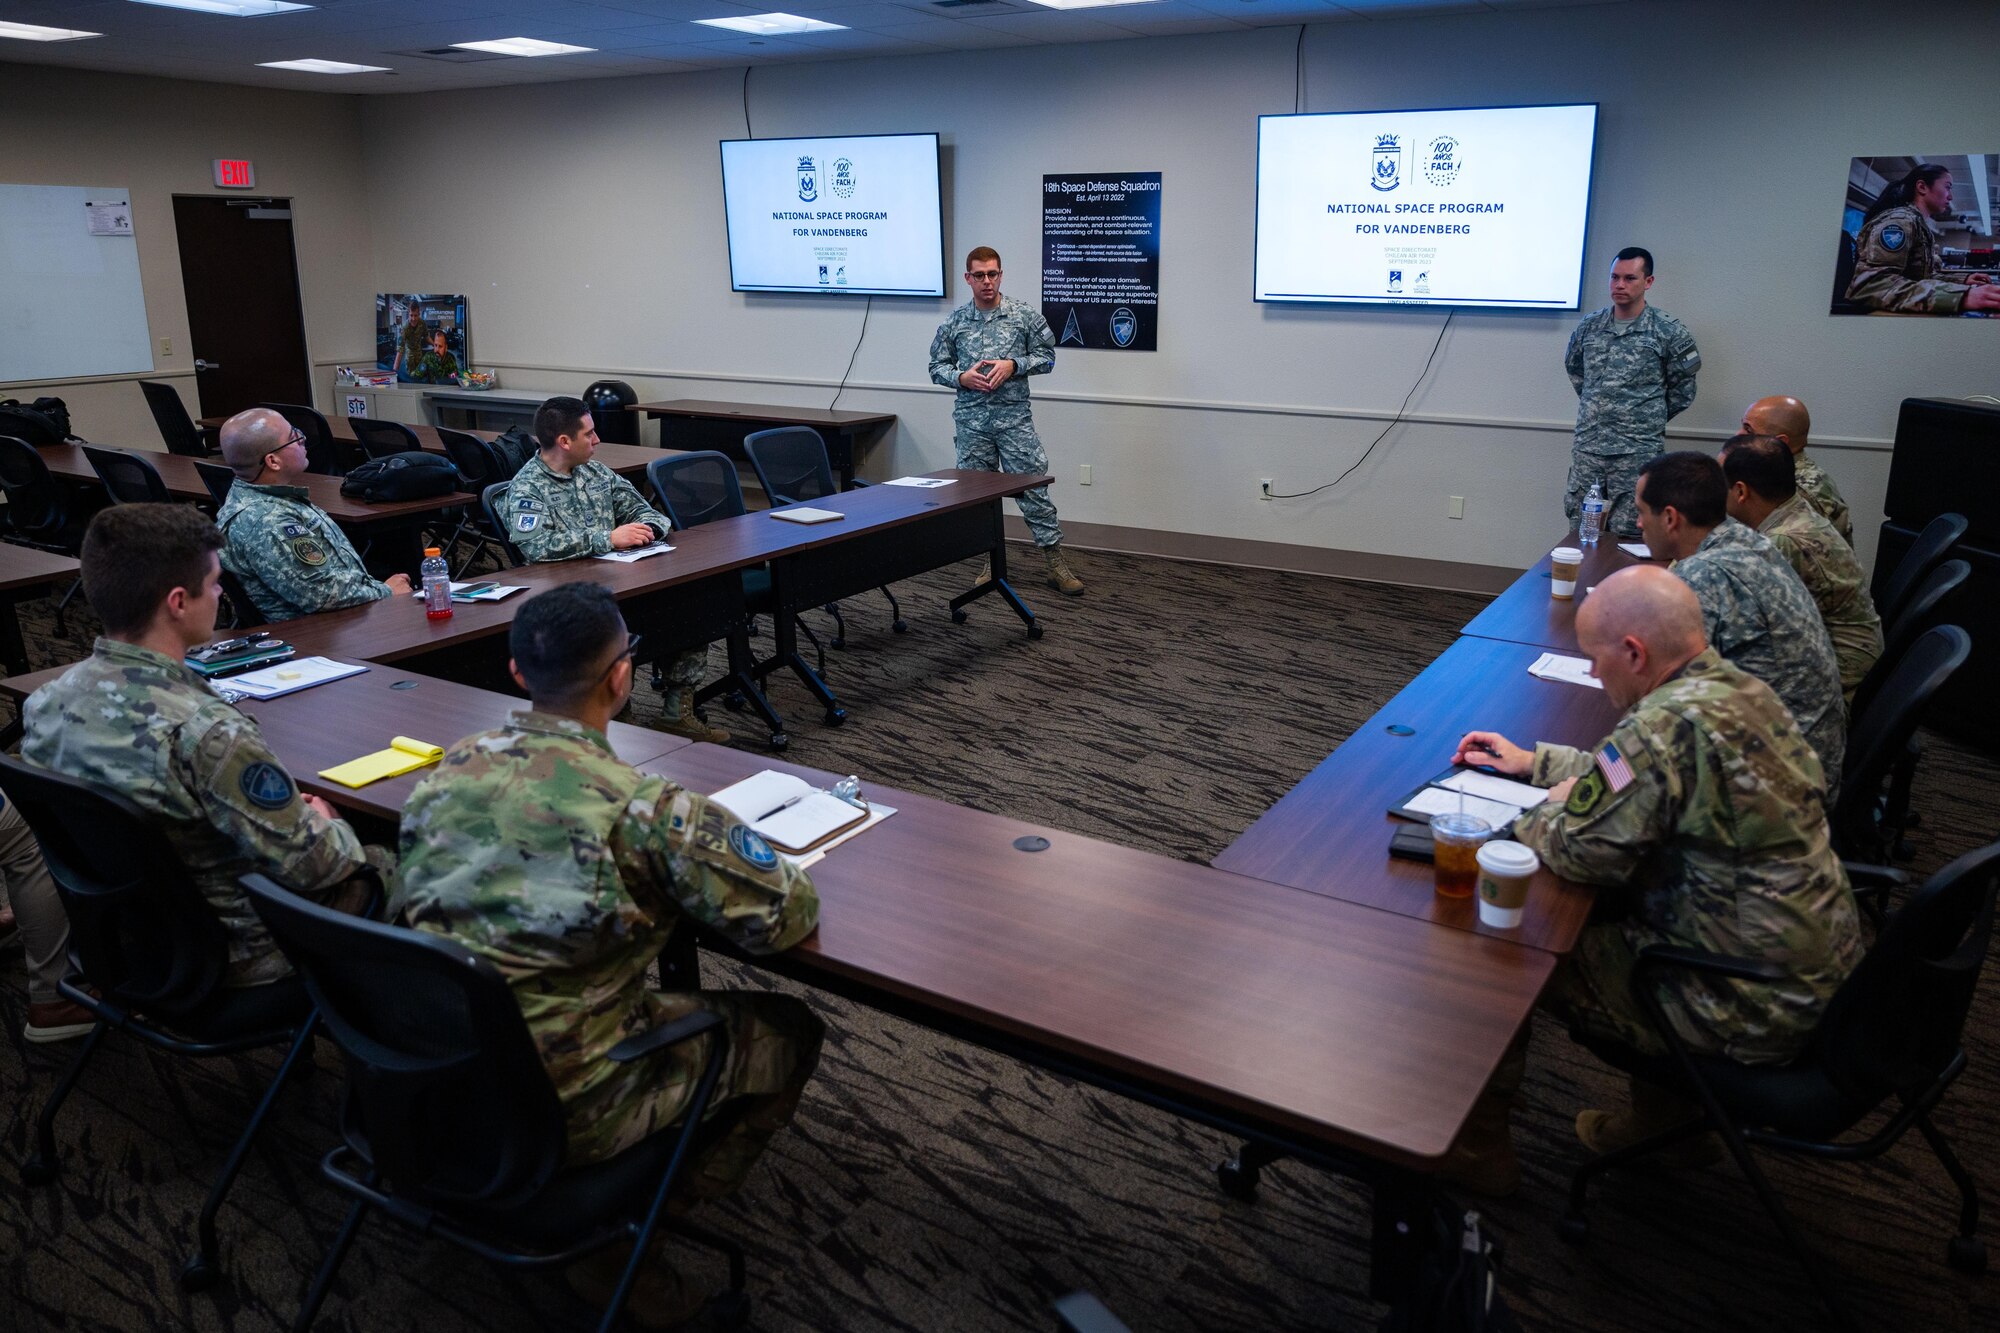 Two members of the Chilean Air Force give a presentation on Chilean space capabilities and organizational structure to members of the 18th Space Defense Squadron and U.S. Southern Command during their immersion on Vandenberg Space Force Base, Calif., Sept. 14, 2023. The Combined Force Space Component Command hosted a delegation from partner nation Chile with discussions focused on Space Domain Awareness, aiming to increase the understanding and benefits of existing Space Situational Awareness sharing agreements, interoperability, and integration (U.S. Space Force photo by Tech. Sgt. Luke Kitterman)